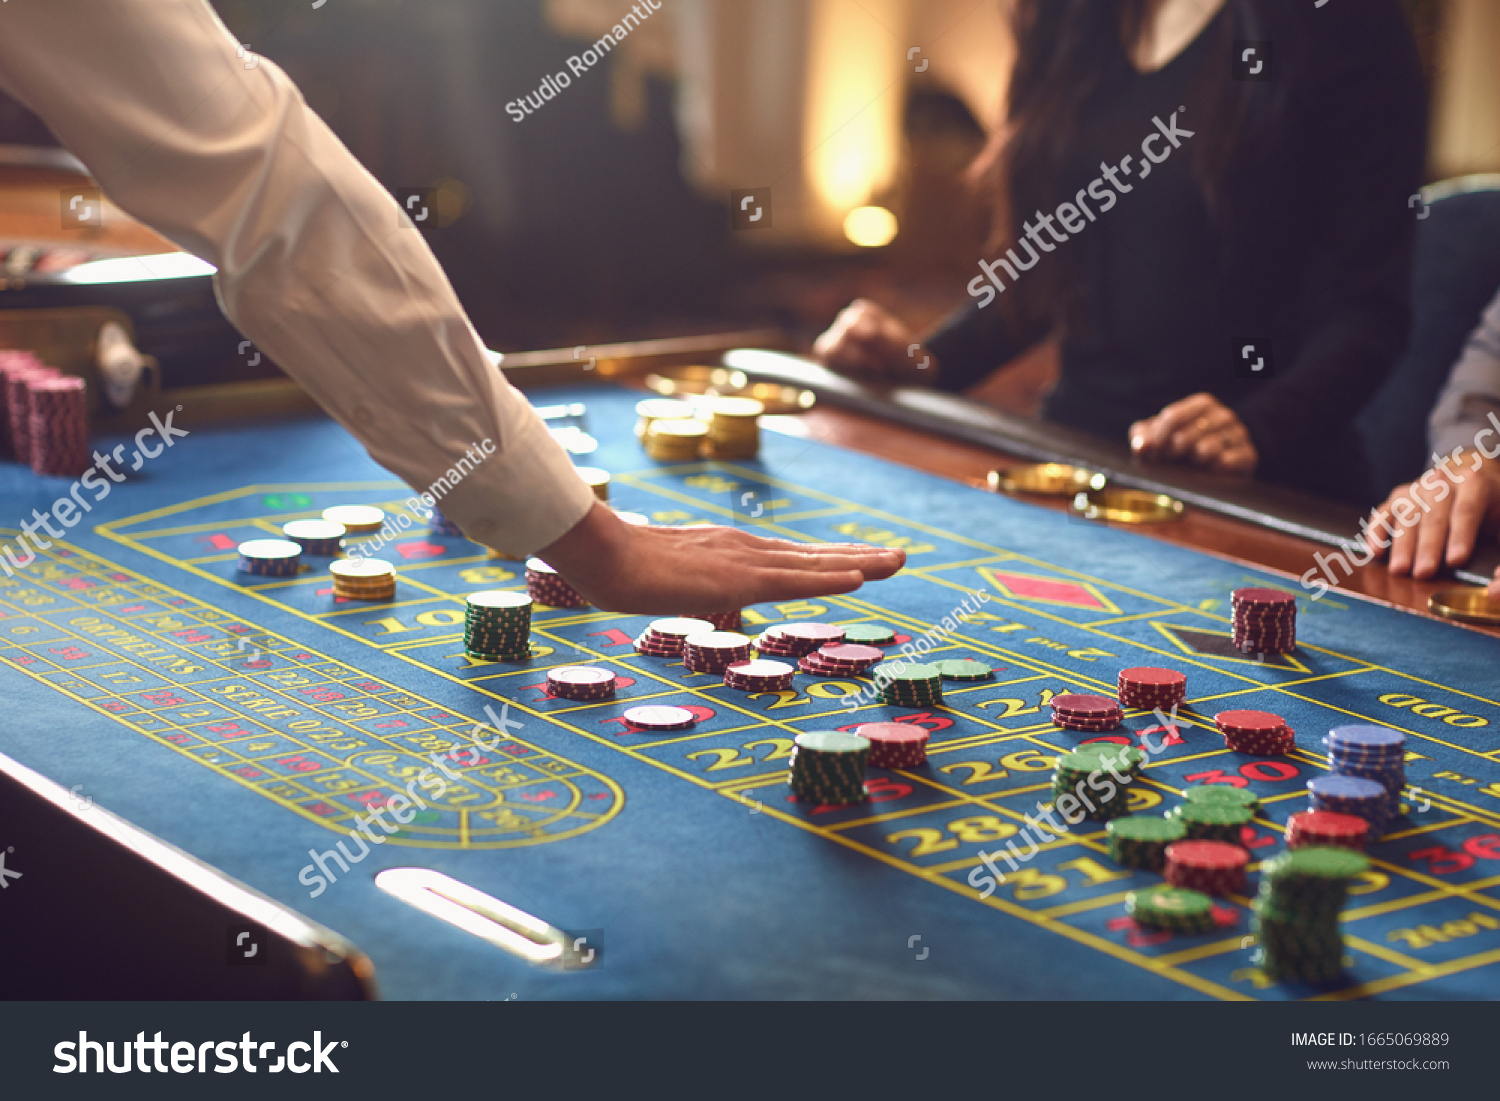 People gambling at roulette poker in a casino. #1665069889